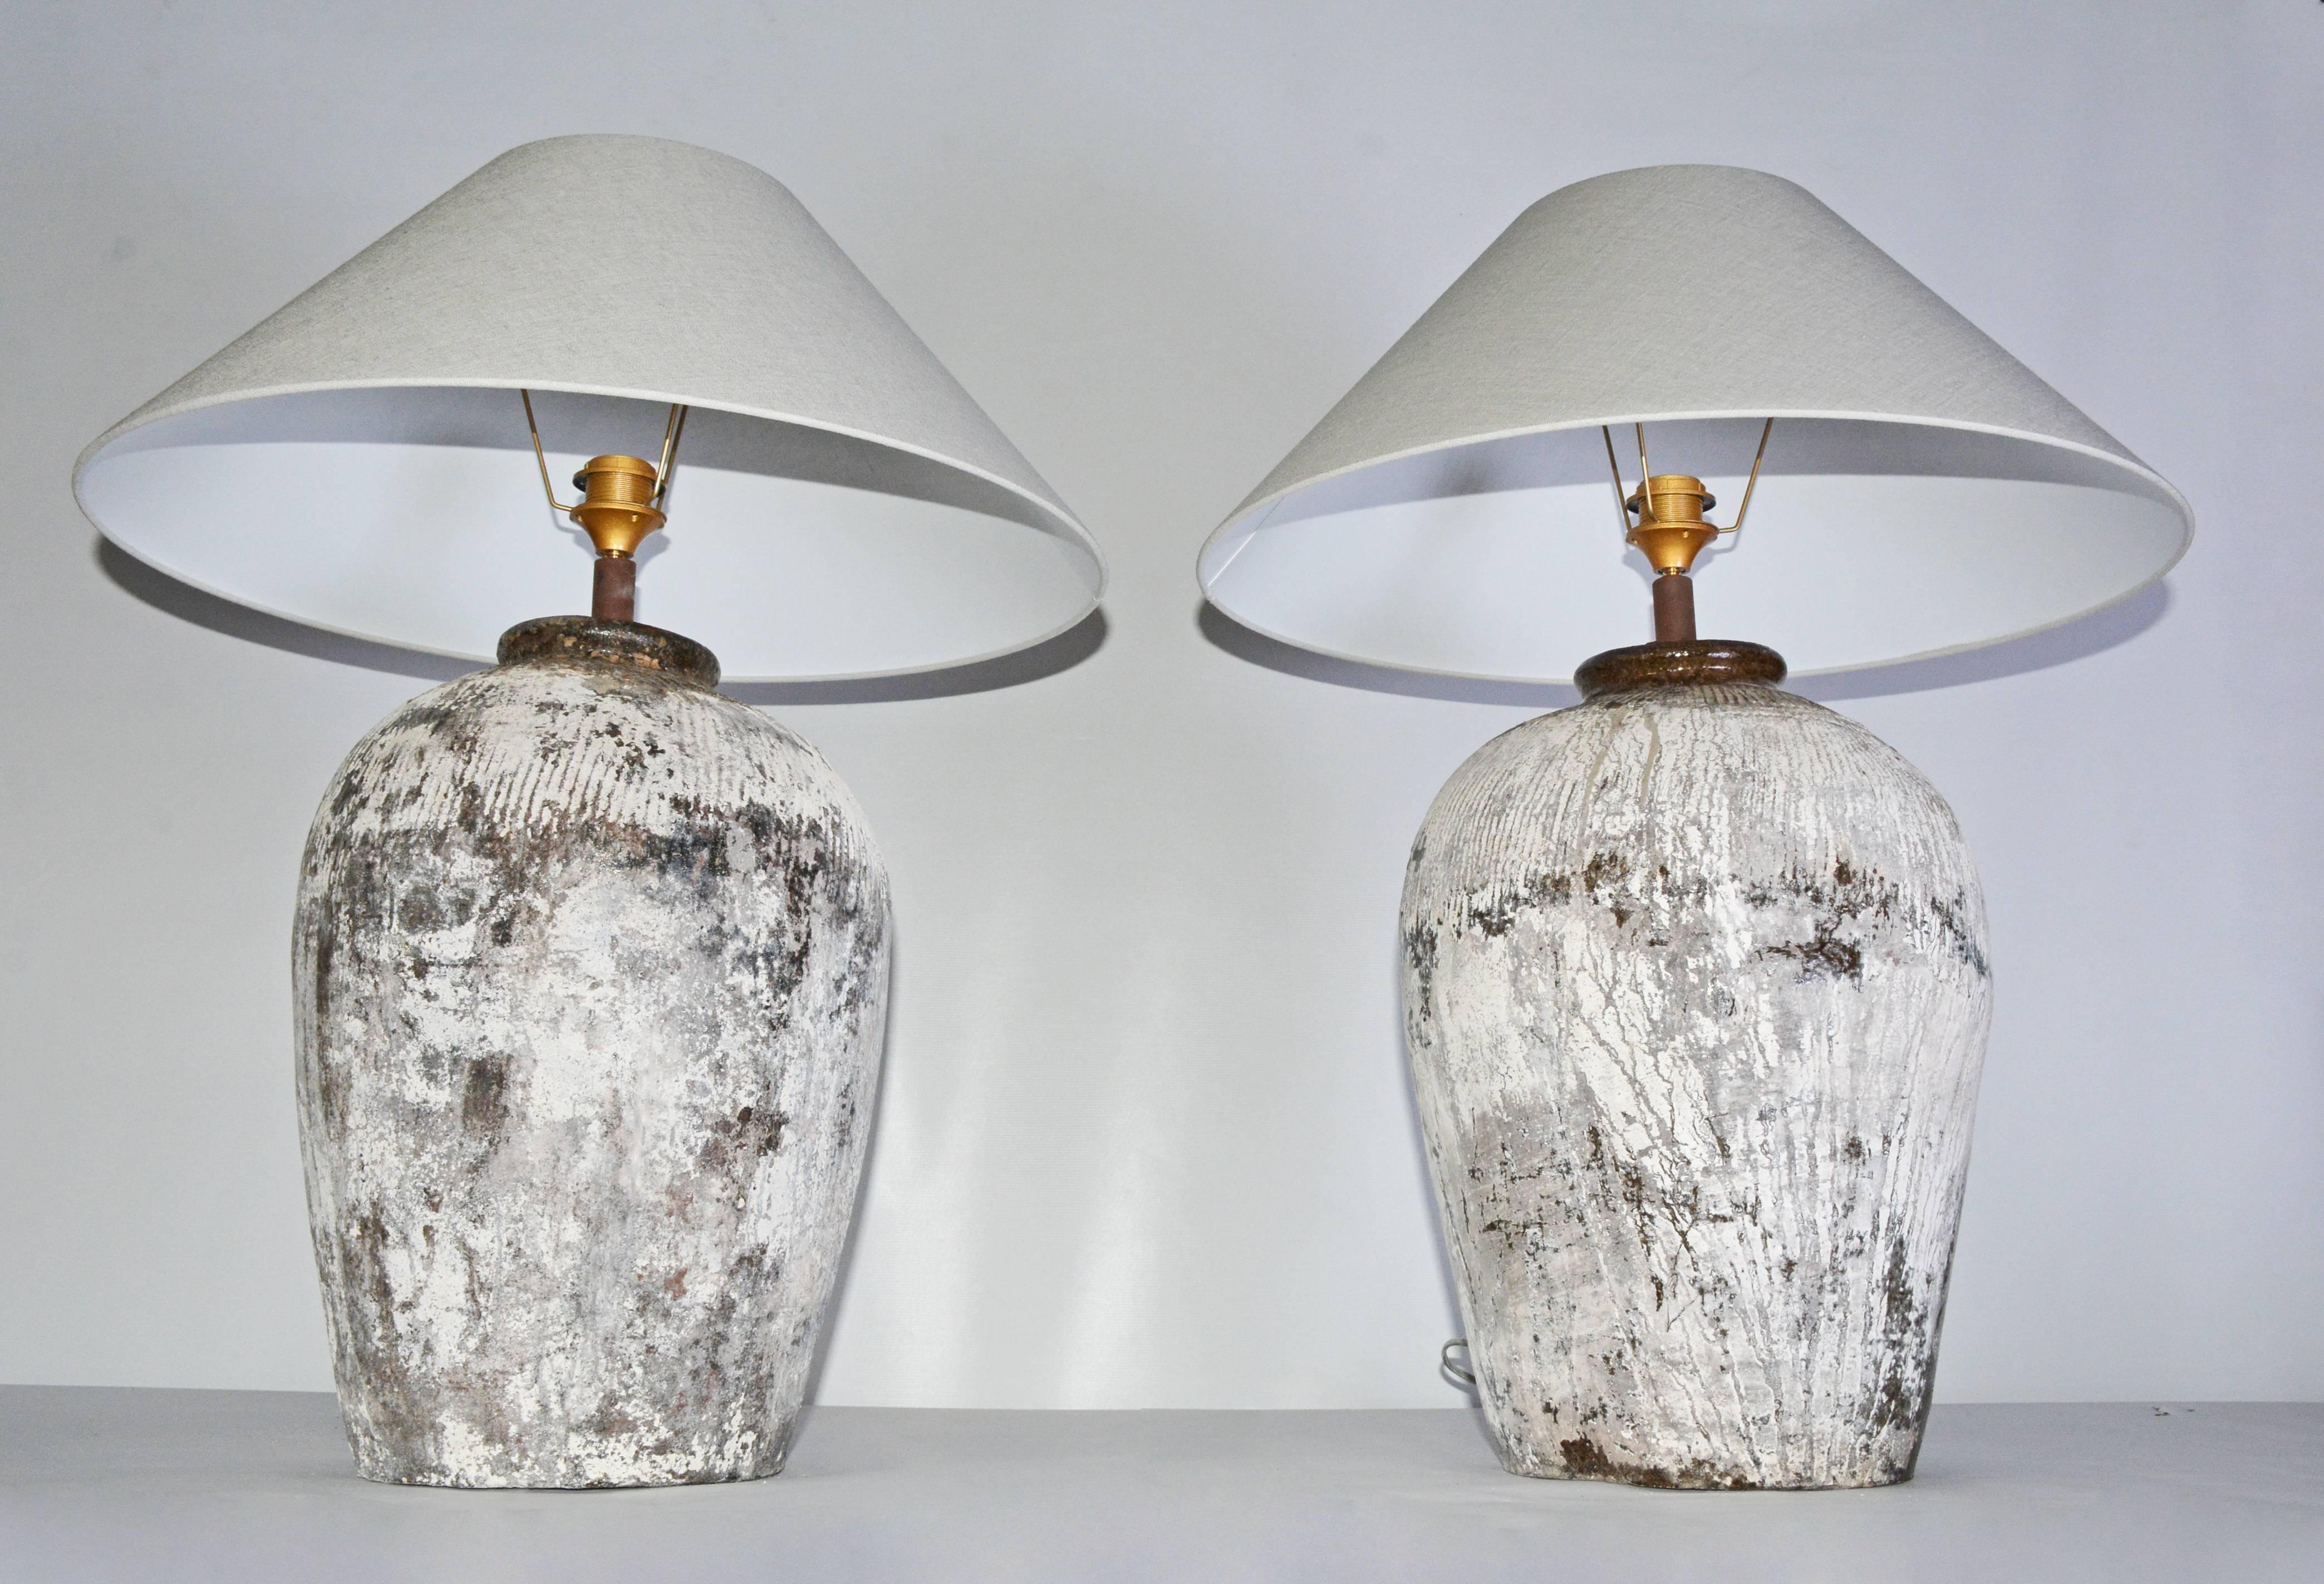 Almost a matching pair of large table lamps made from rustic vintage Chinese clay wine storage jars with a black and white mottled pattern and ribbed surfaces around the tops. The shades are made of pale grey cross-hatch linen. 

Shade height: